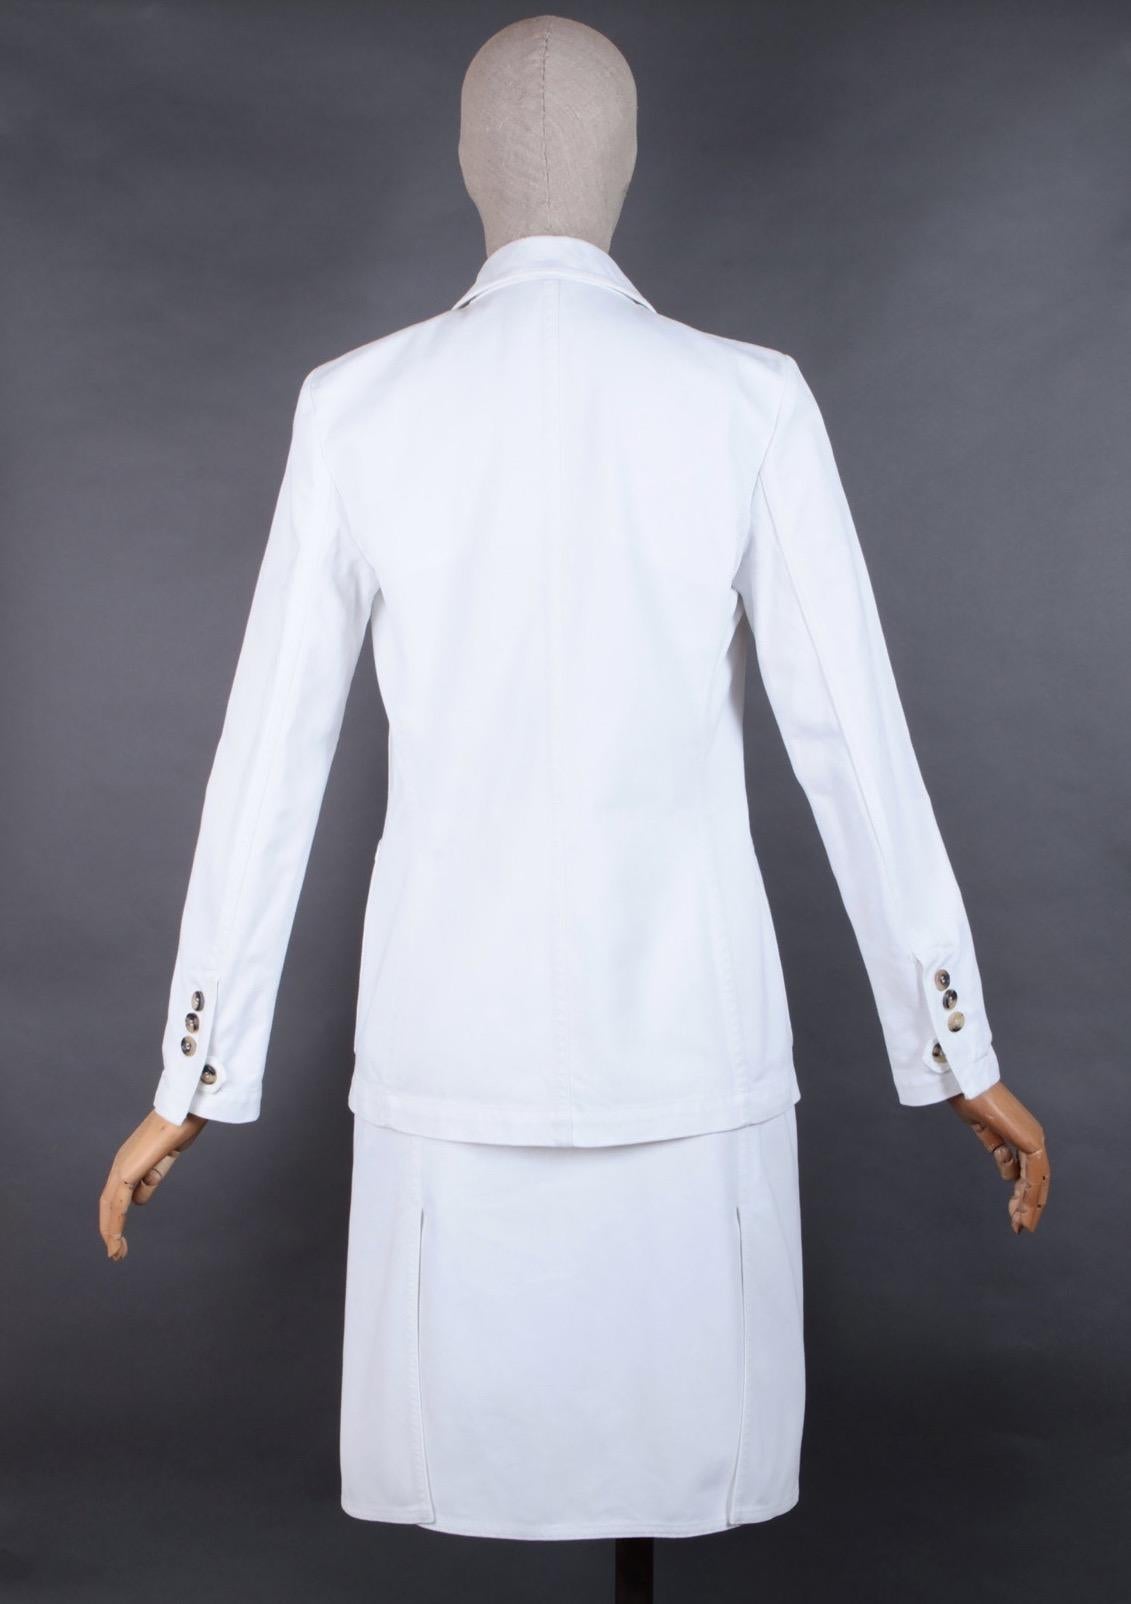 Yves Saint Laurent by Tom Ford White Suit 2